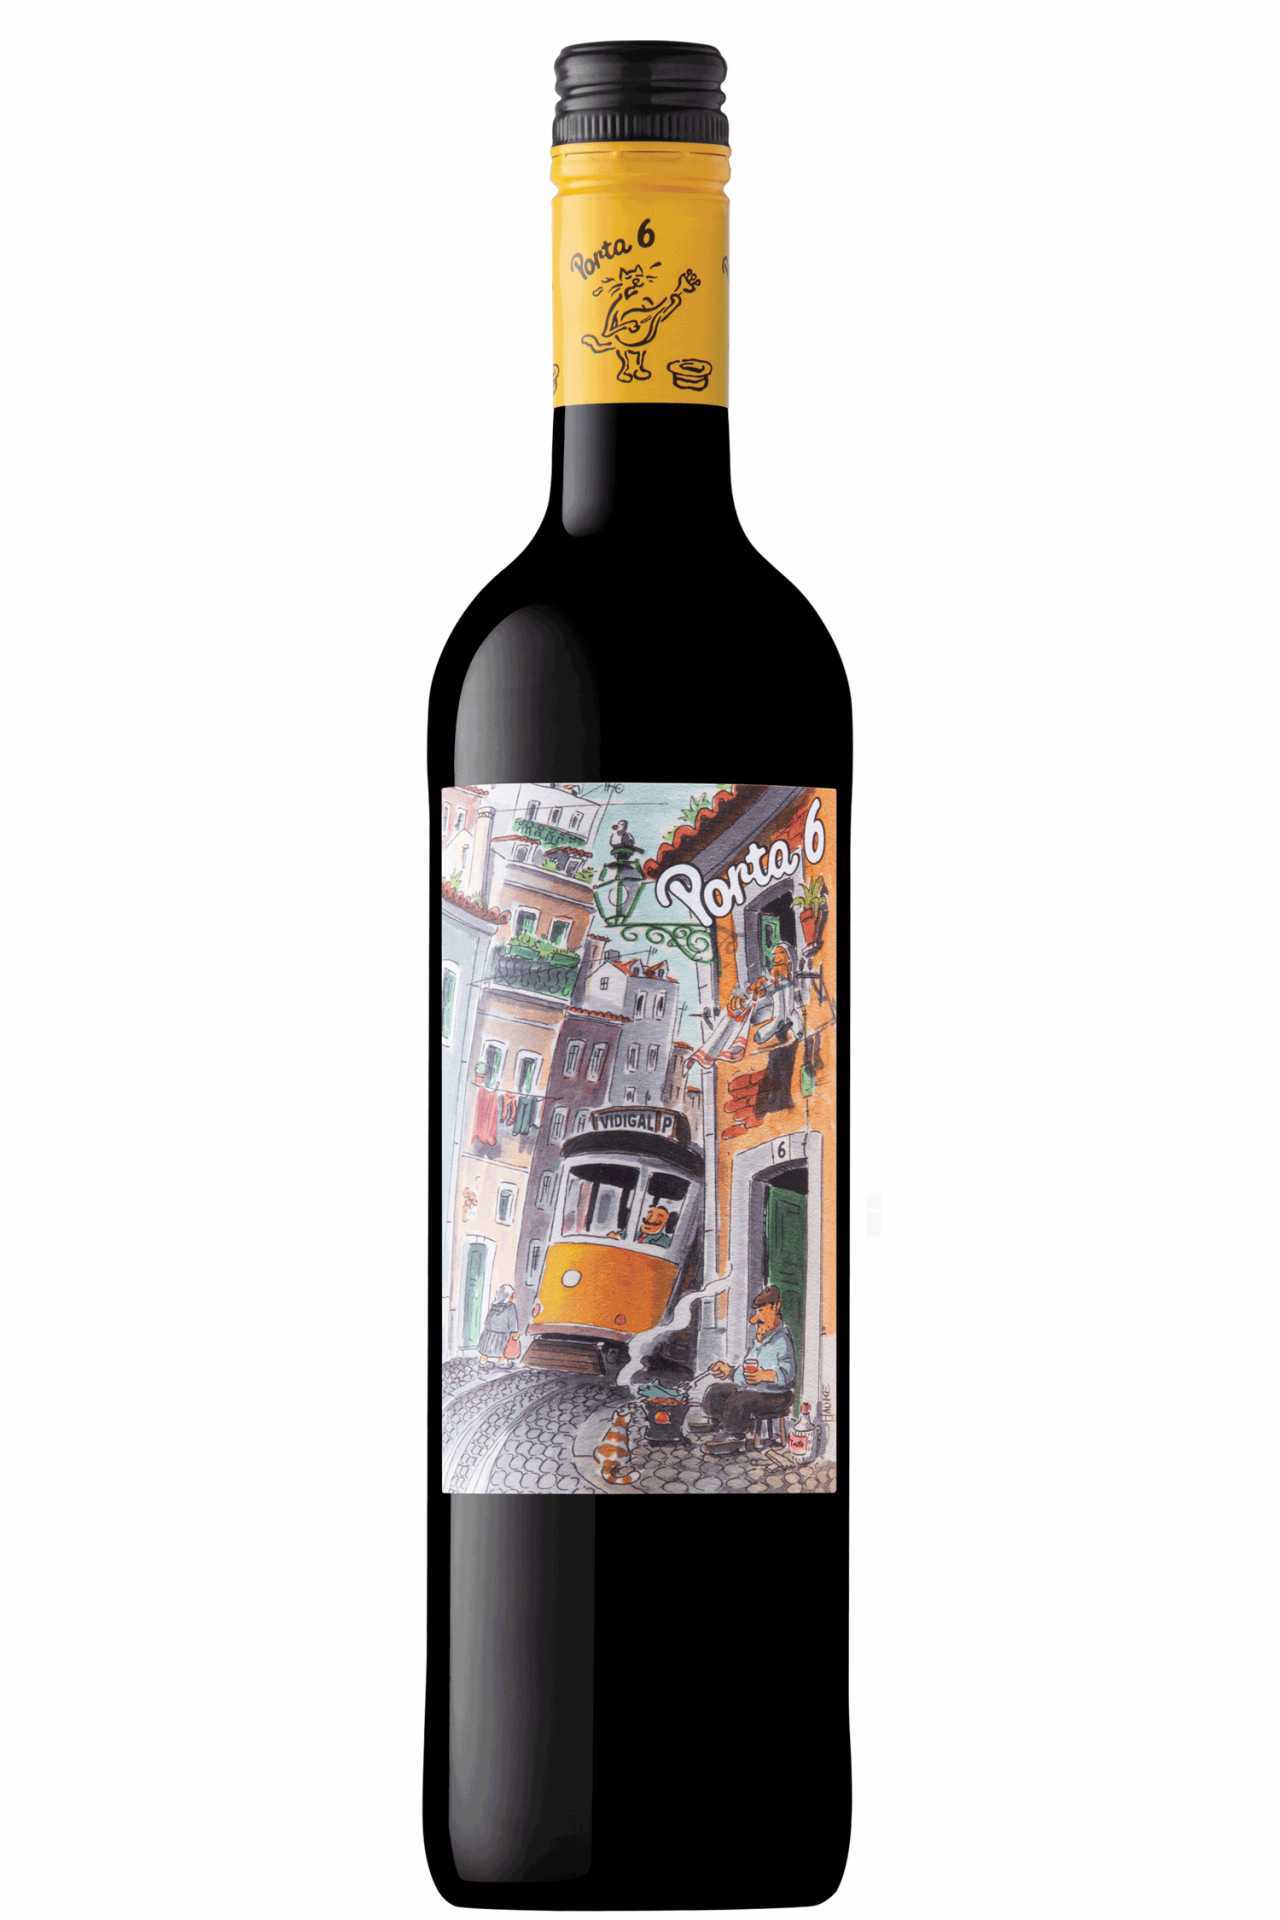 Wines from Portugal | Porta 6 Red IGP Lisboa